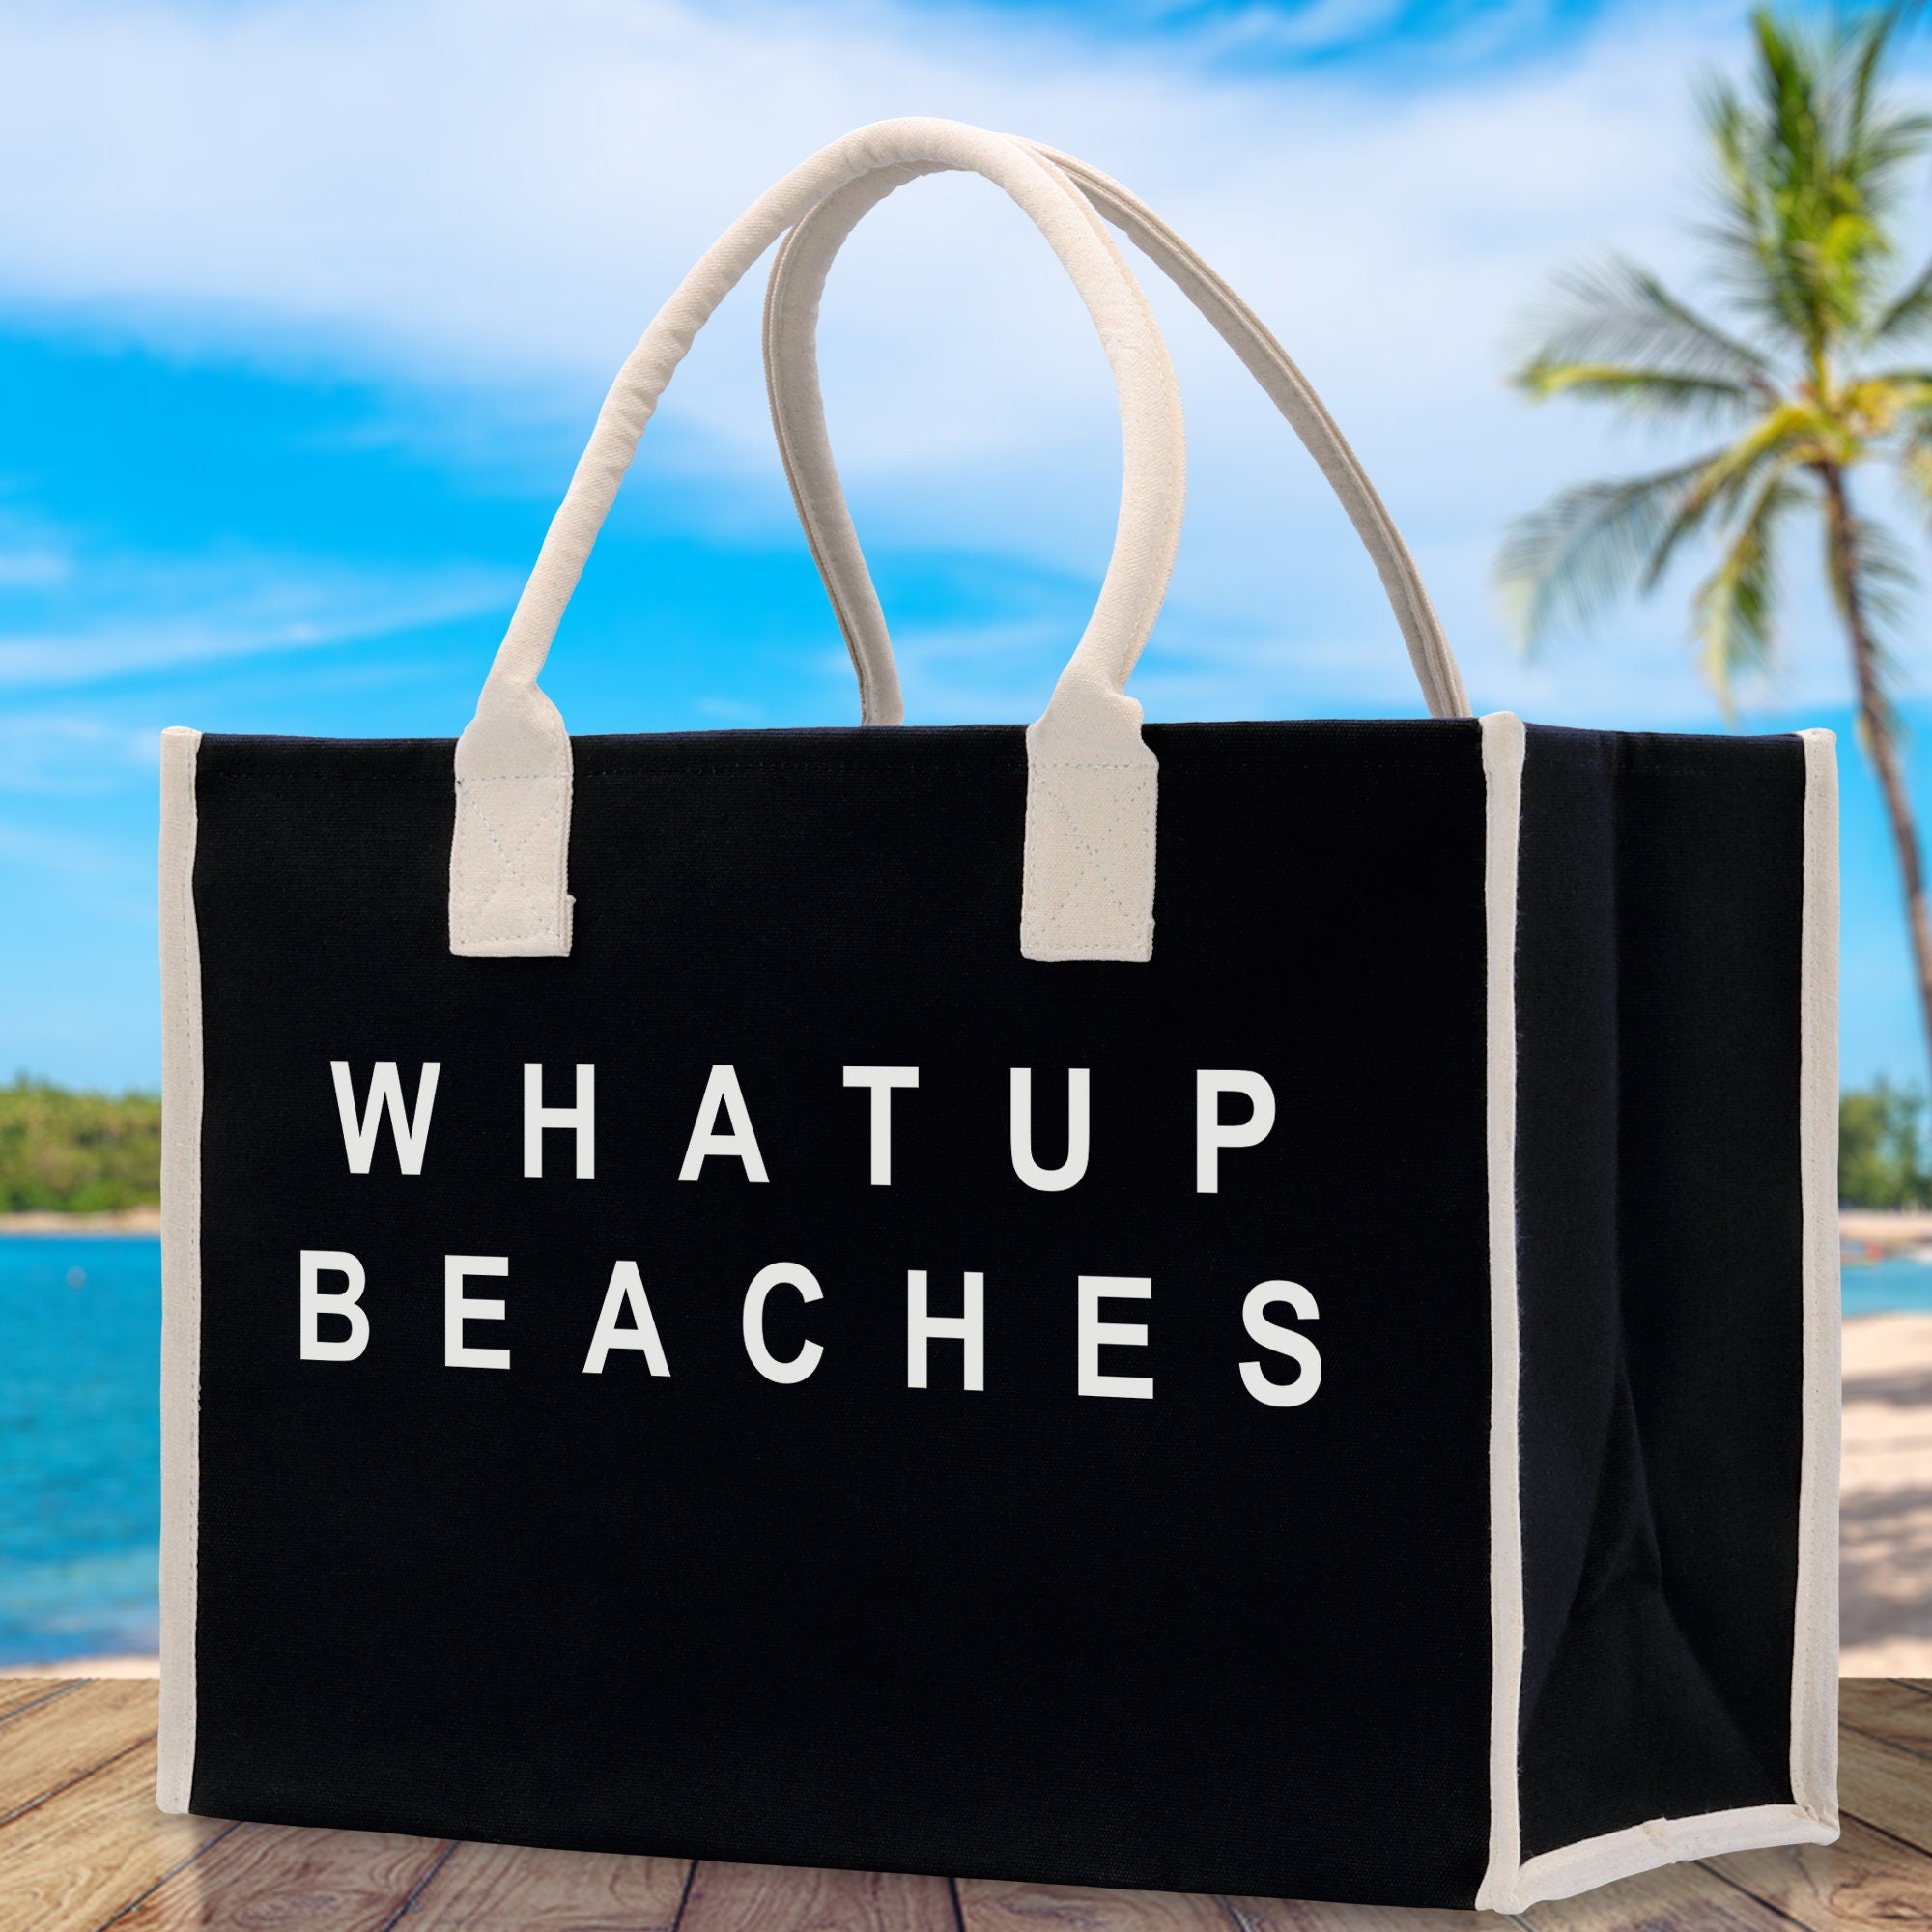 Whatup Beaches Cotton Canvas Chic Beach Tote Bag Multipurpose Tote Weekender Tote Gift for Her Outdoor Tote Vacation Tote Large Beach Bag